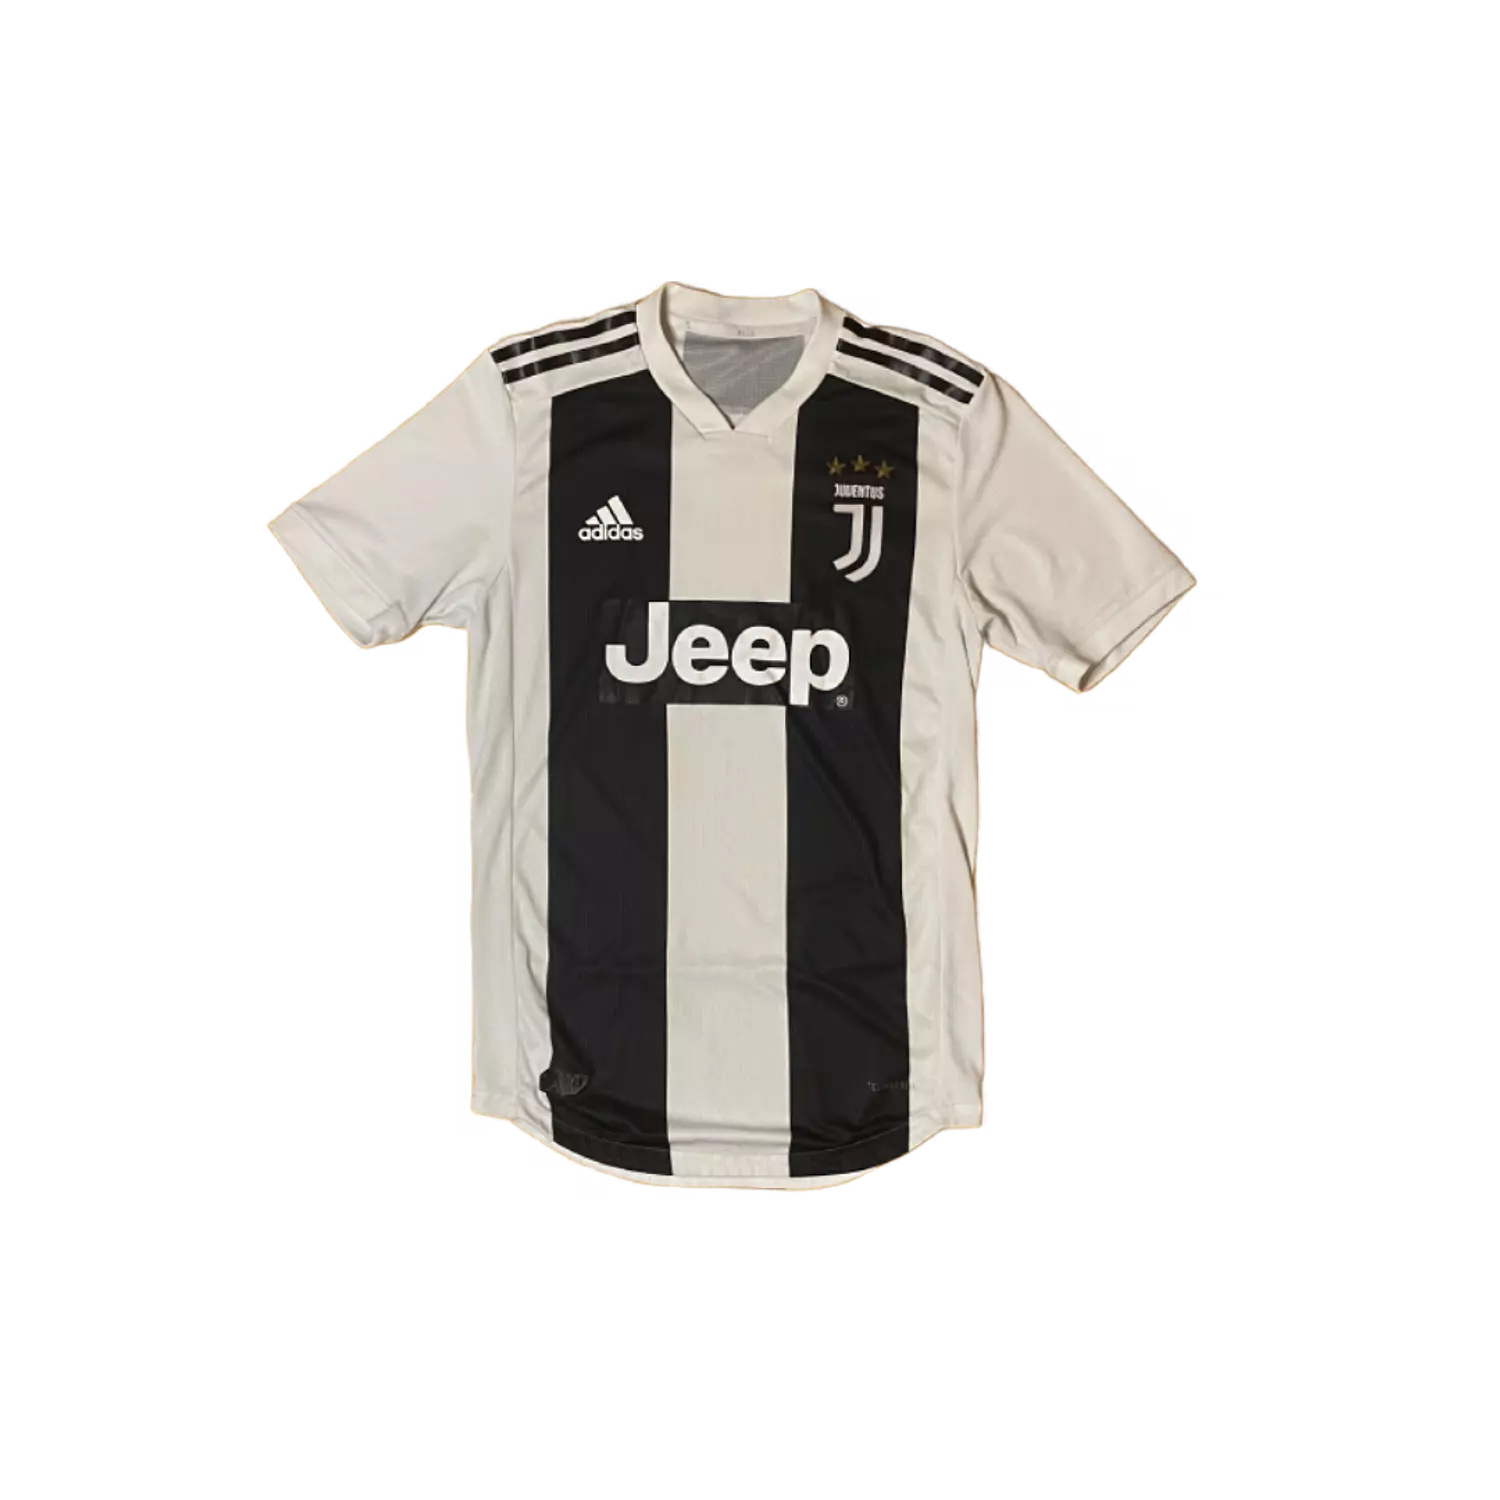 Juventus 2018/19 Home Kit (S)  hover image